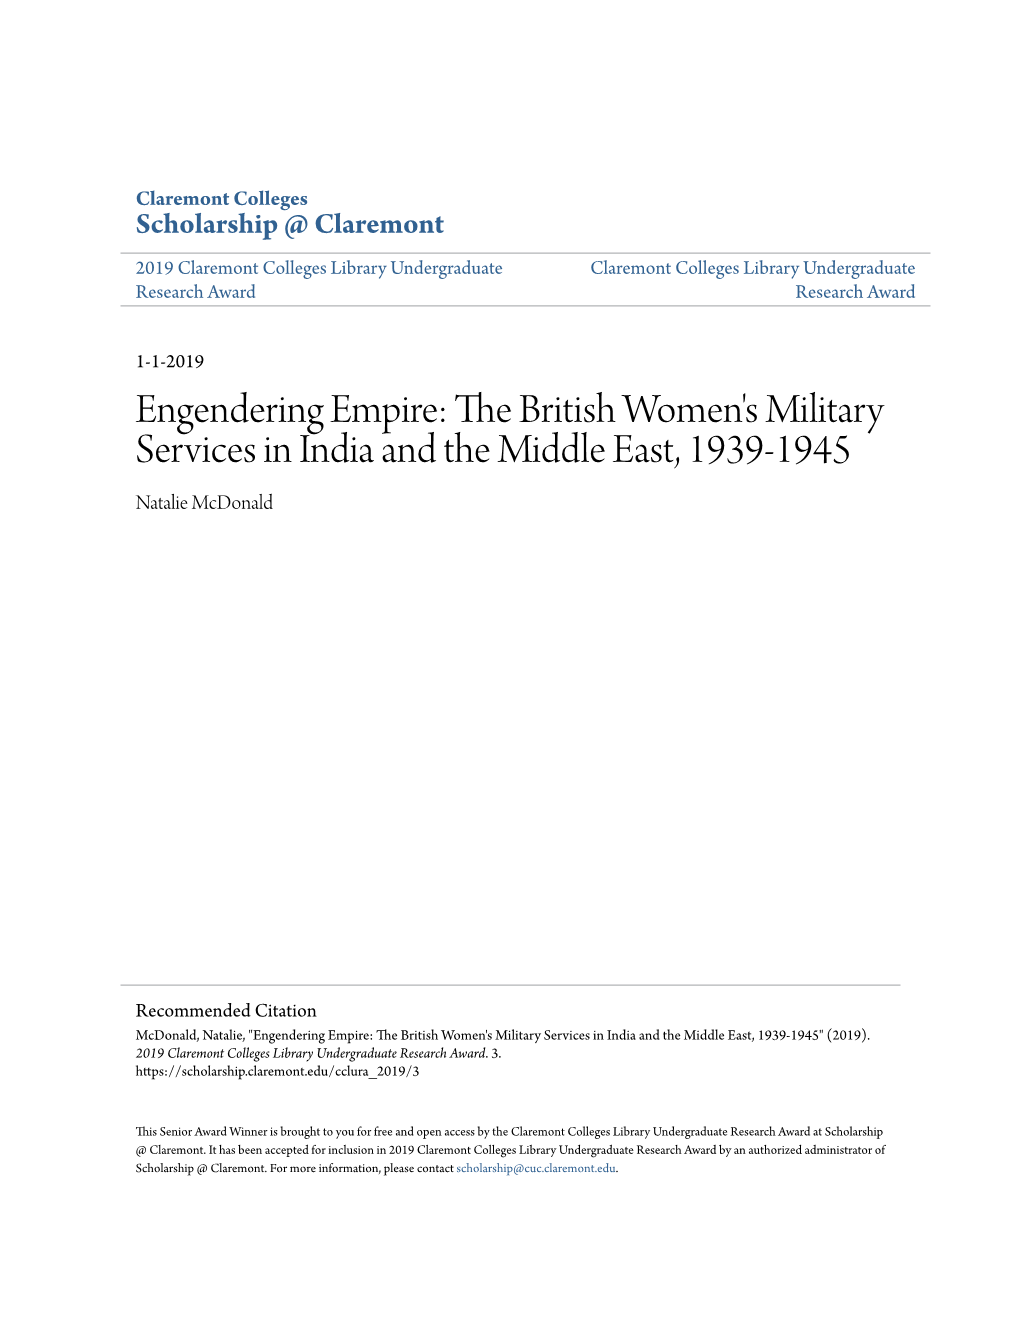 The British Women's Military Services in India